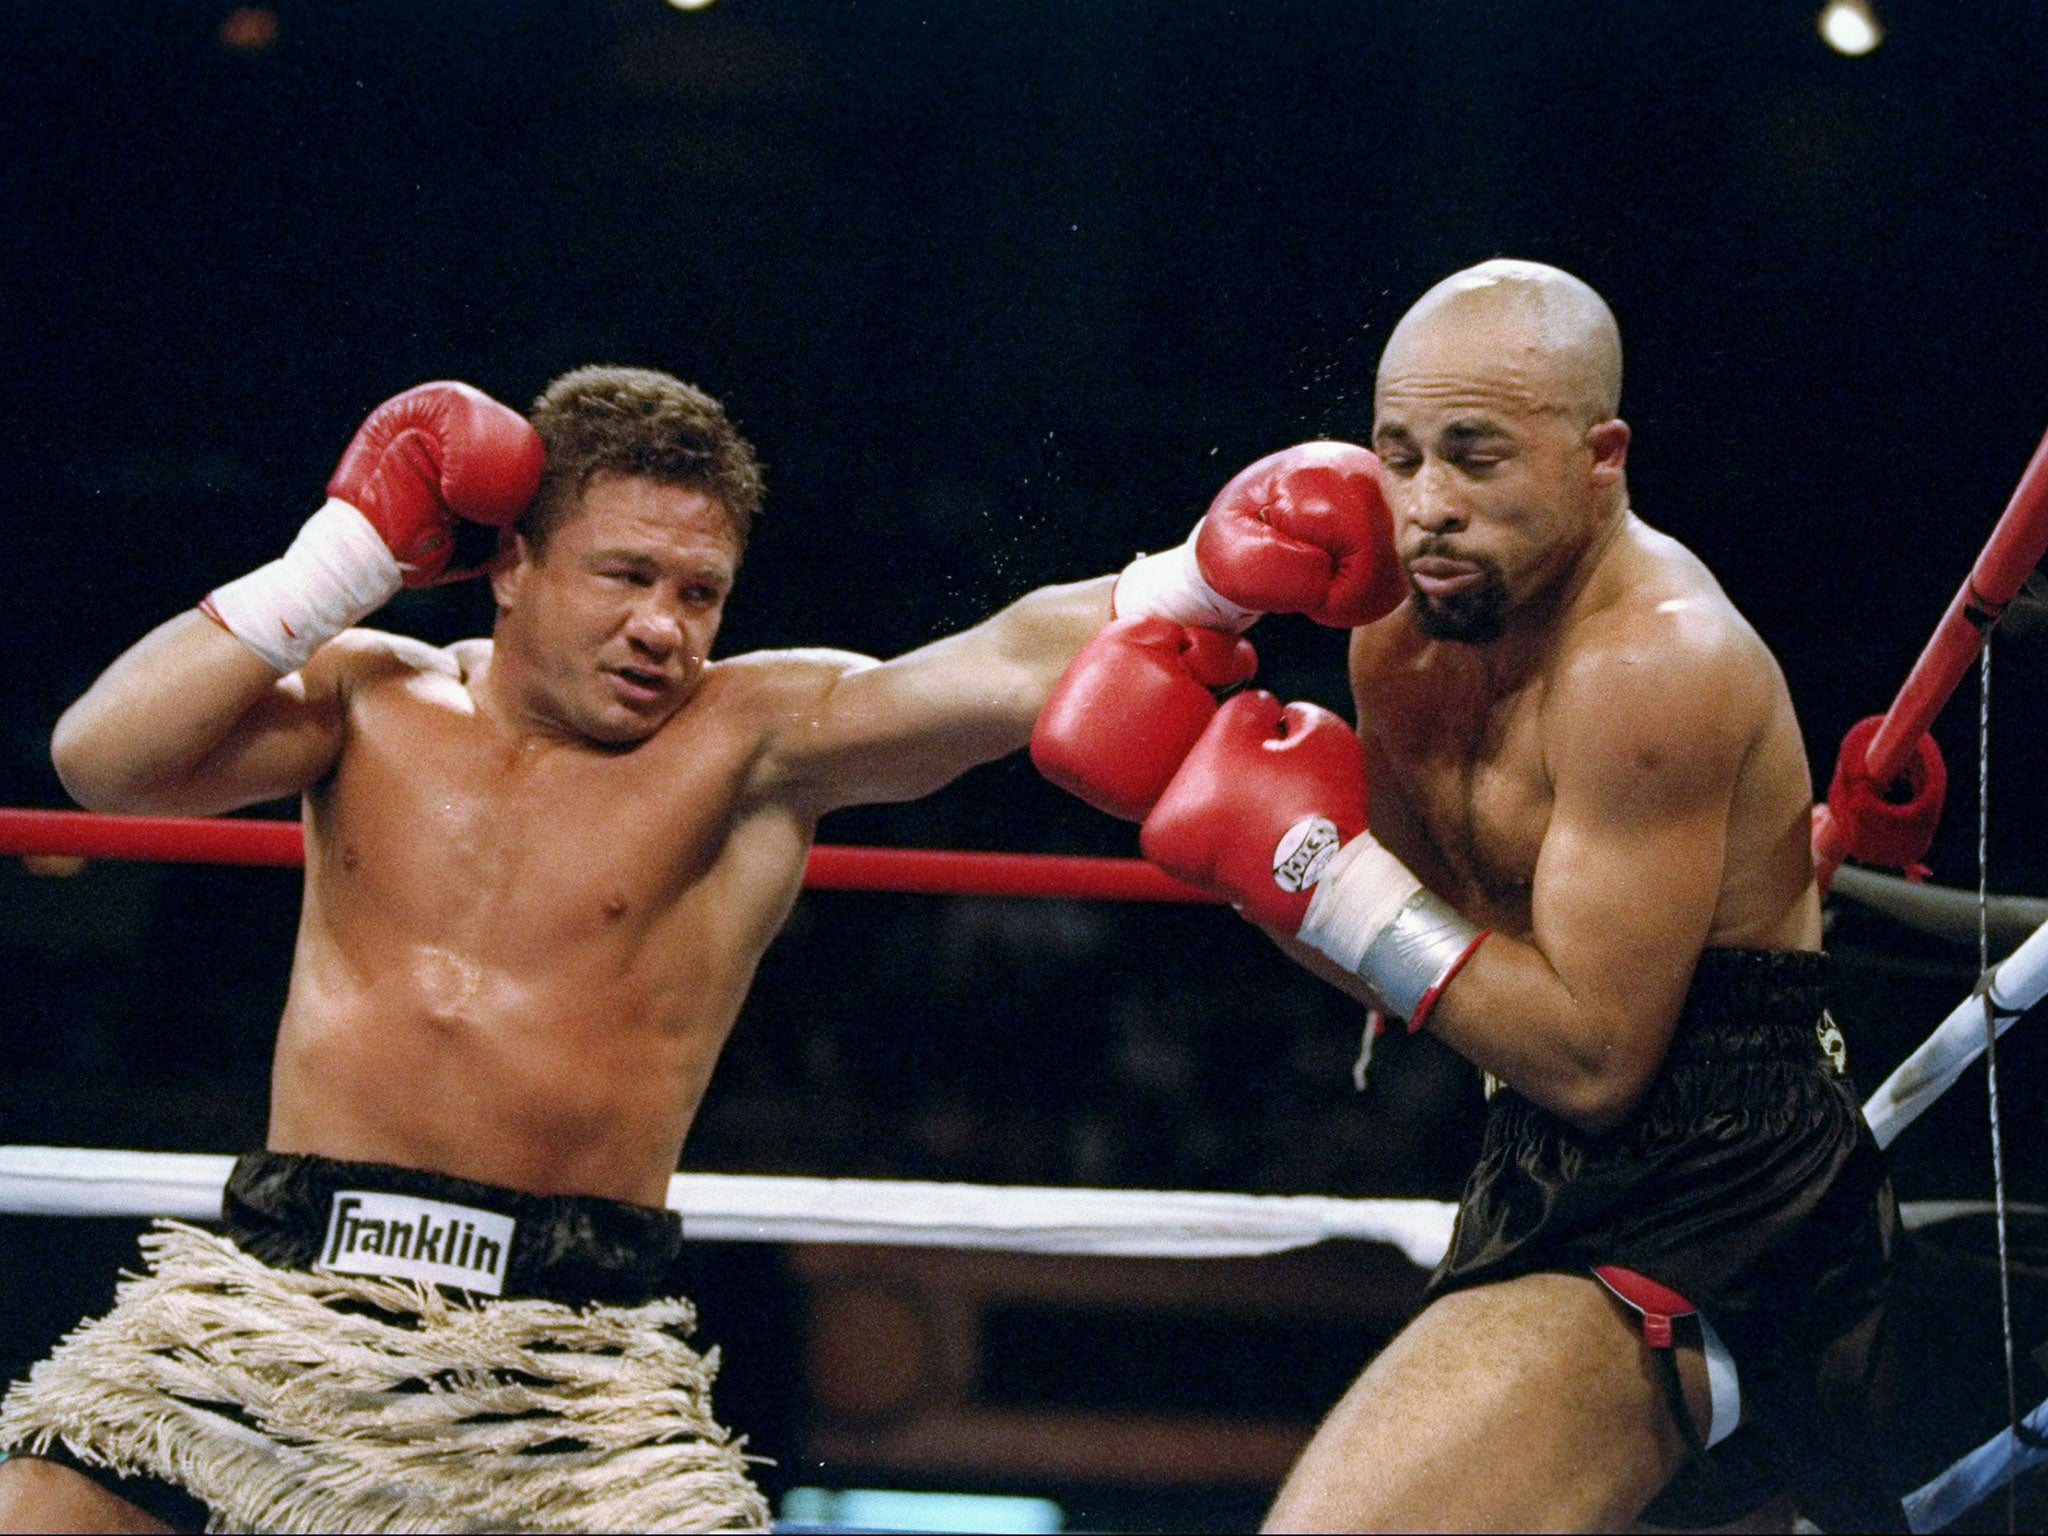 Vinny Pazienza (left) and Lloyd Honeyghan in action during a bout in Atlantic City, June 1993